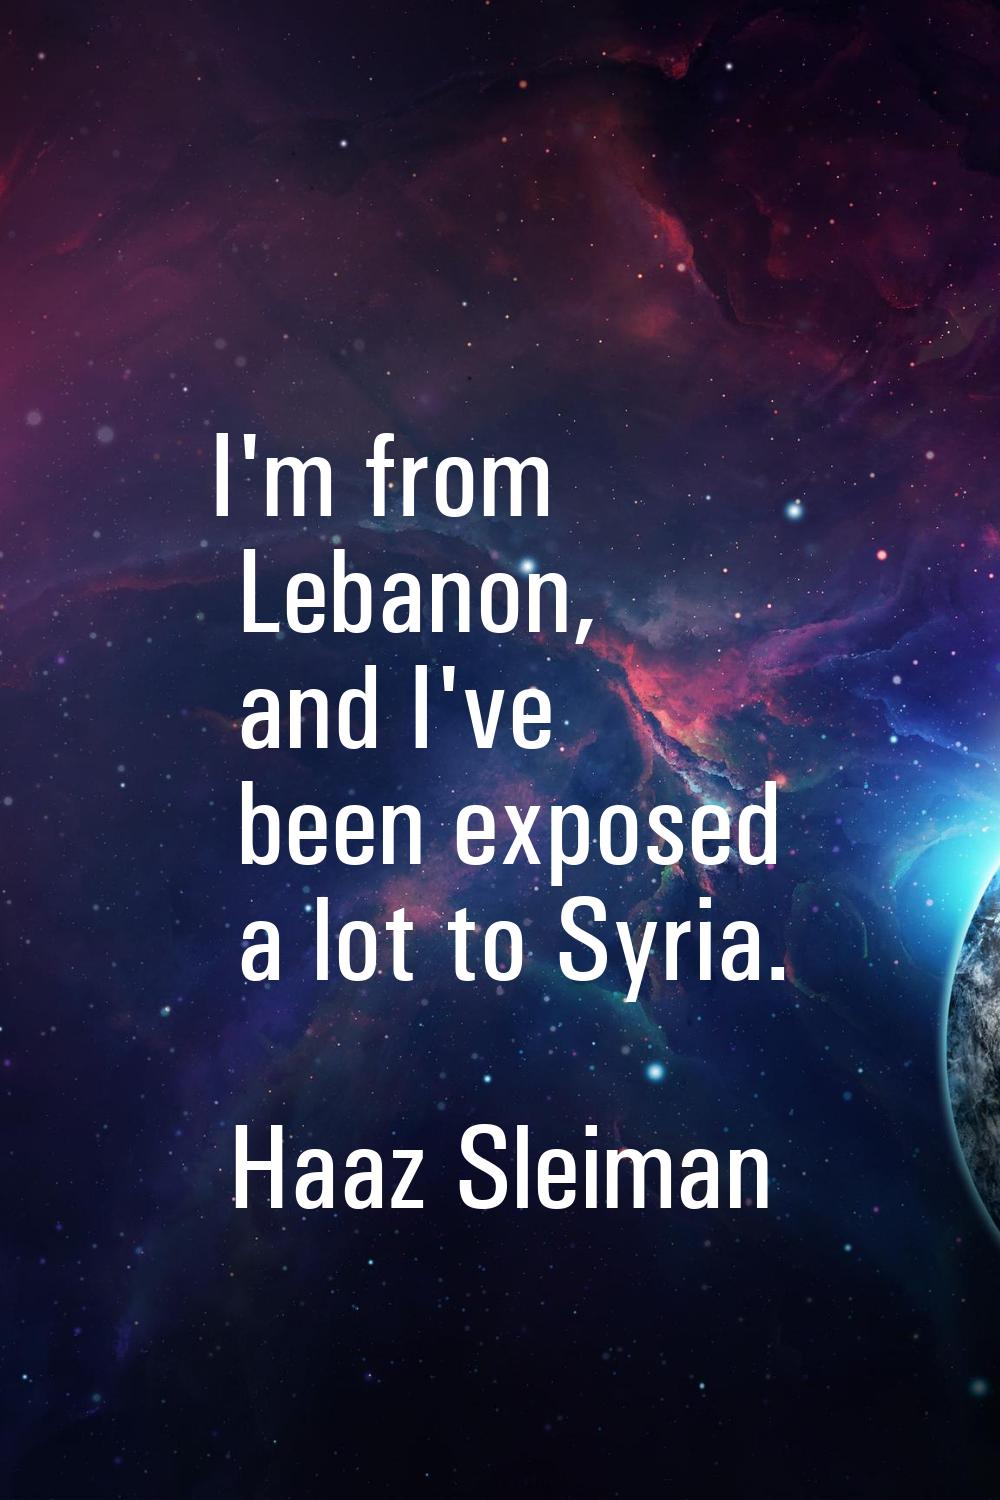 I'm from Lebanon, and I've been exposed a lot to Syria.